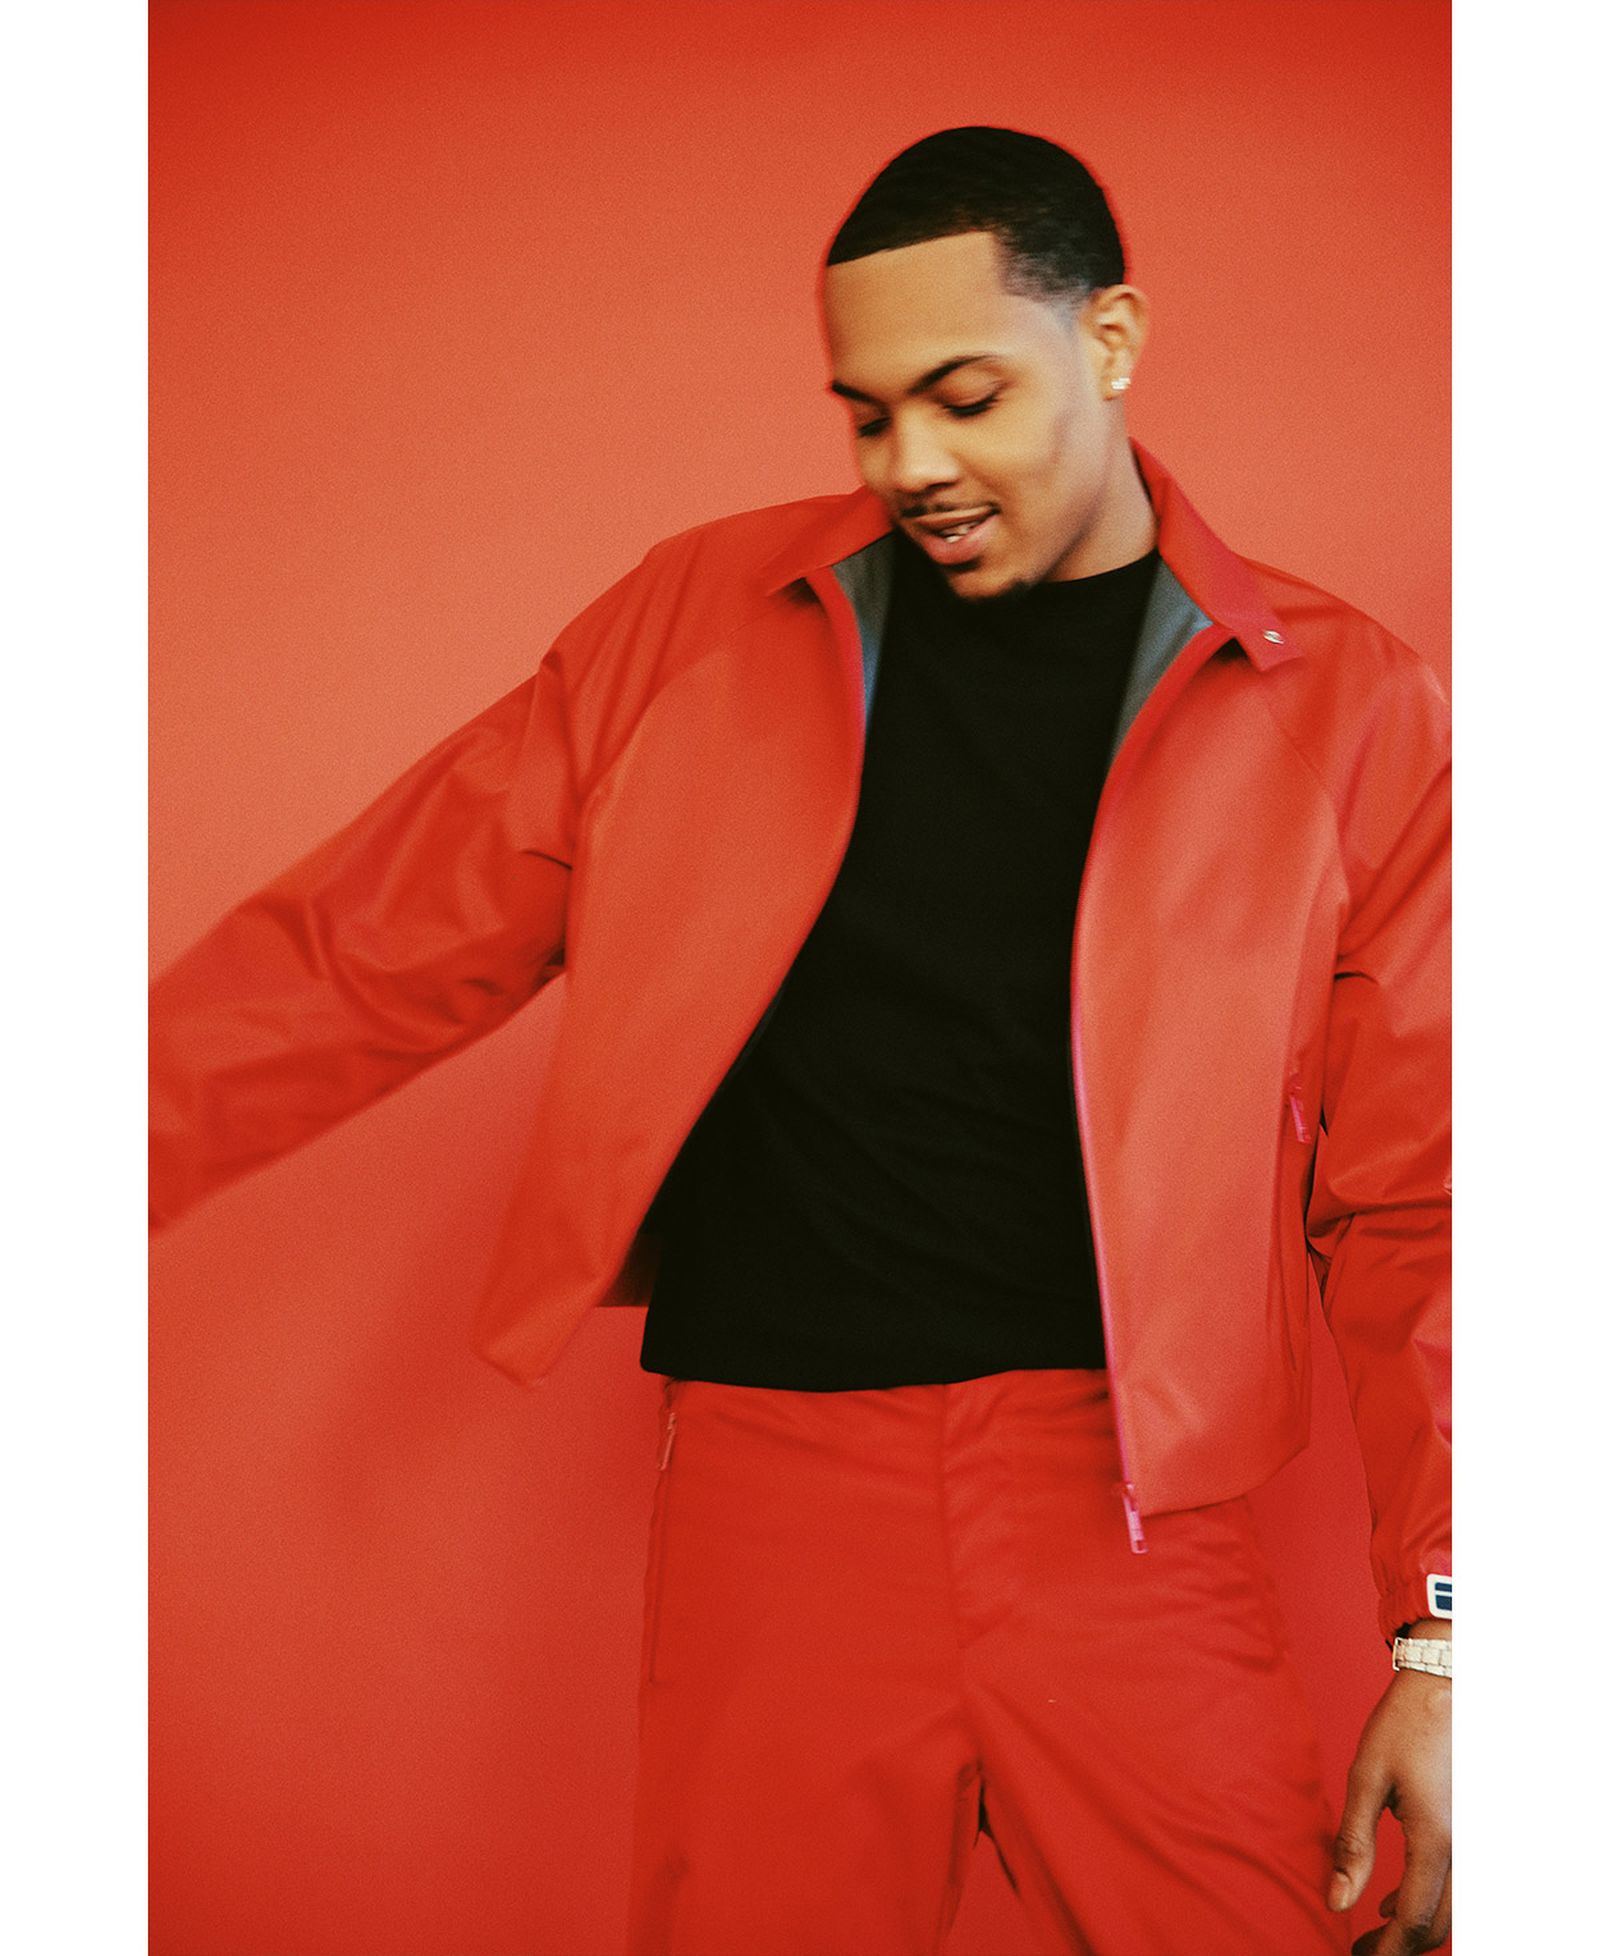 passion pain purpose g herbo creating new chicago story